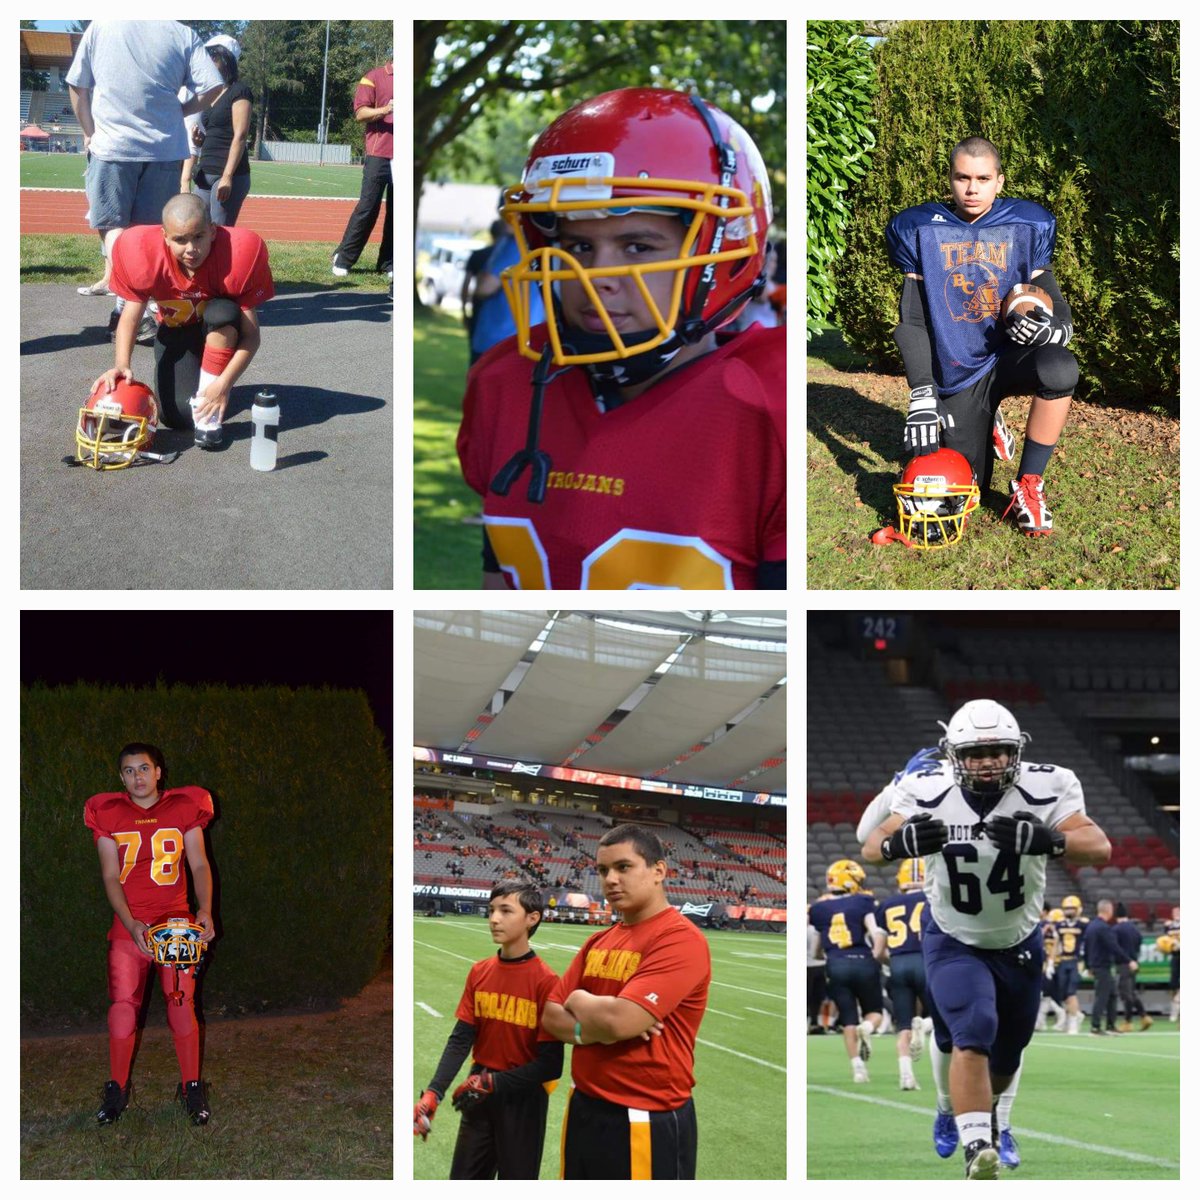 Football is a part of me.

I have played since I was in grade 2. 

My goal has always been to play as long as I can and pursue a teaching and coaching career to give back to my community. 

SFU football is  part of that dream. 

#SaveSFUFootball  🇨🇦🏈 #wecanplay2023